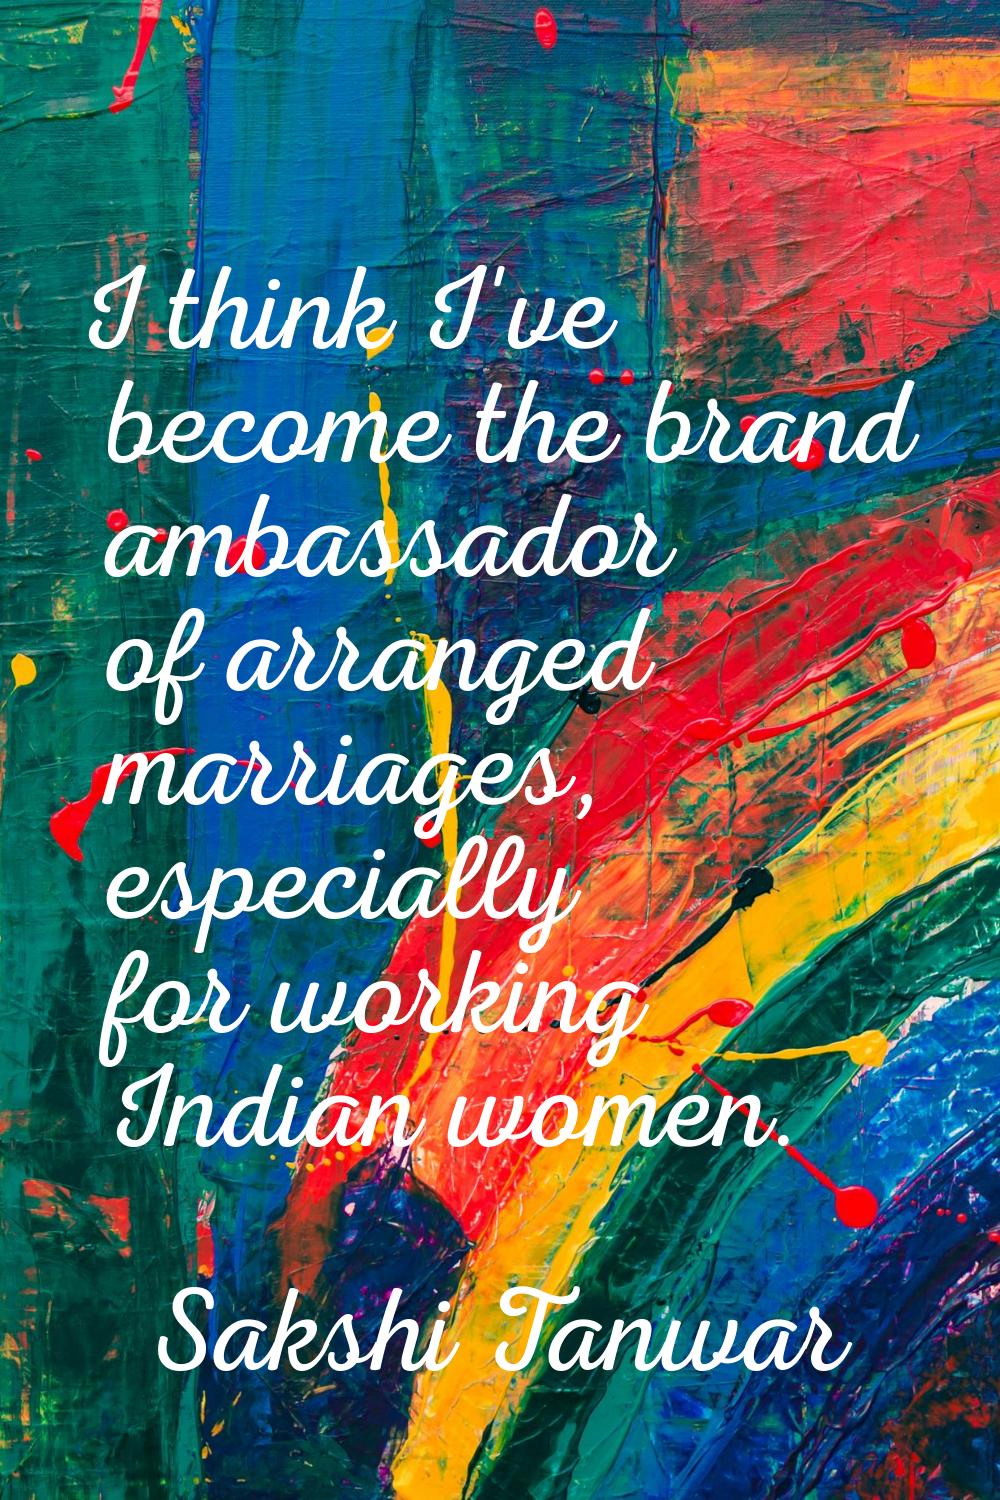 I think I've become the brand ambassador of arranged marriages, especially for working Indian women